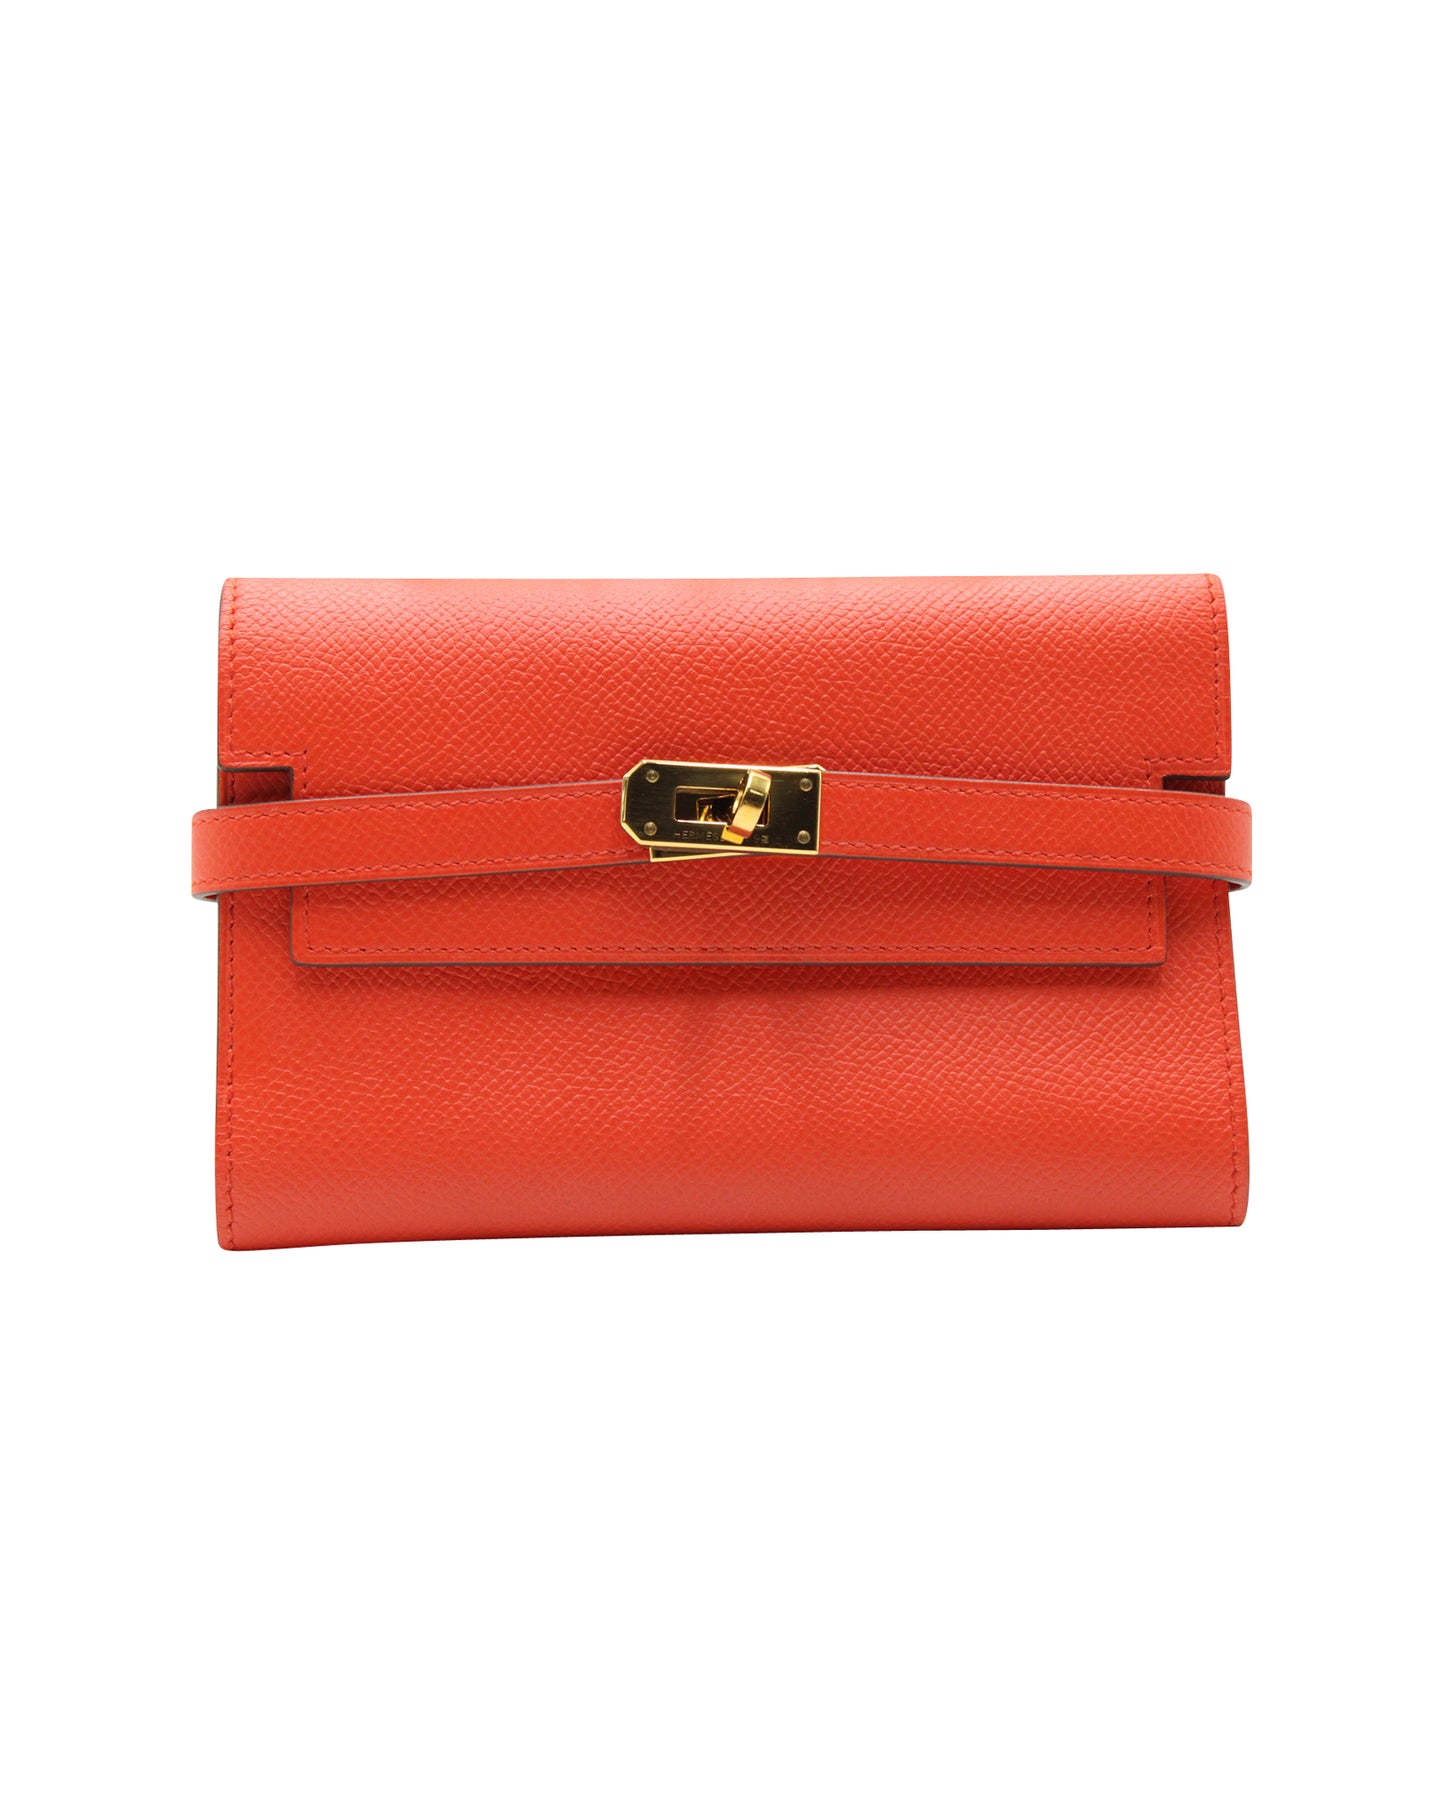 Kelly Continental Wallet in Orange Poppy Togo leather with Gold Hardware